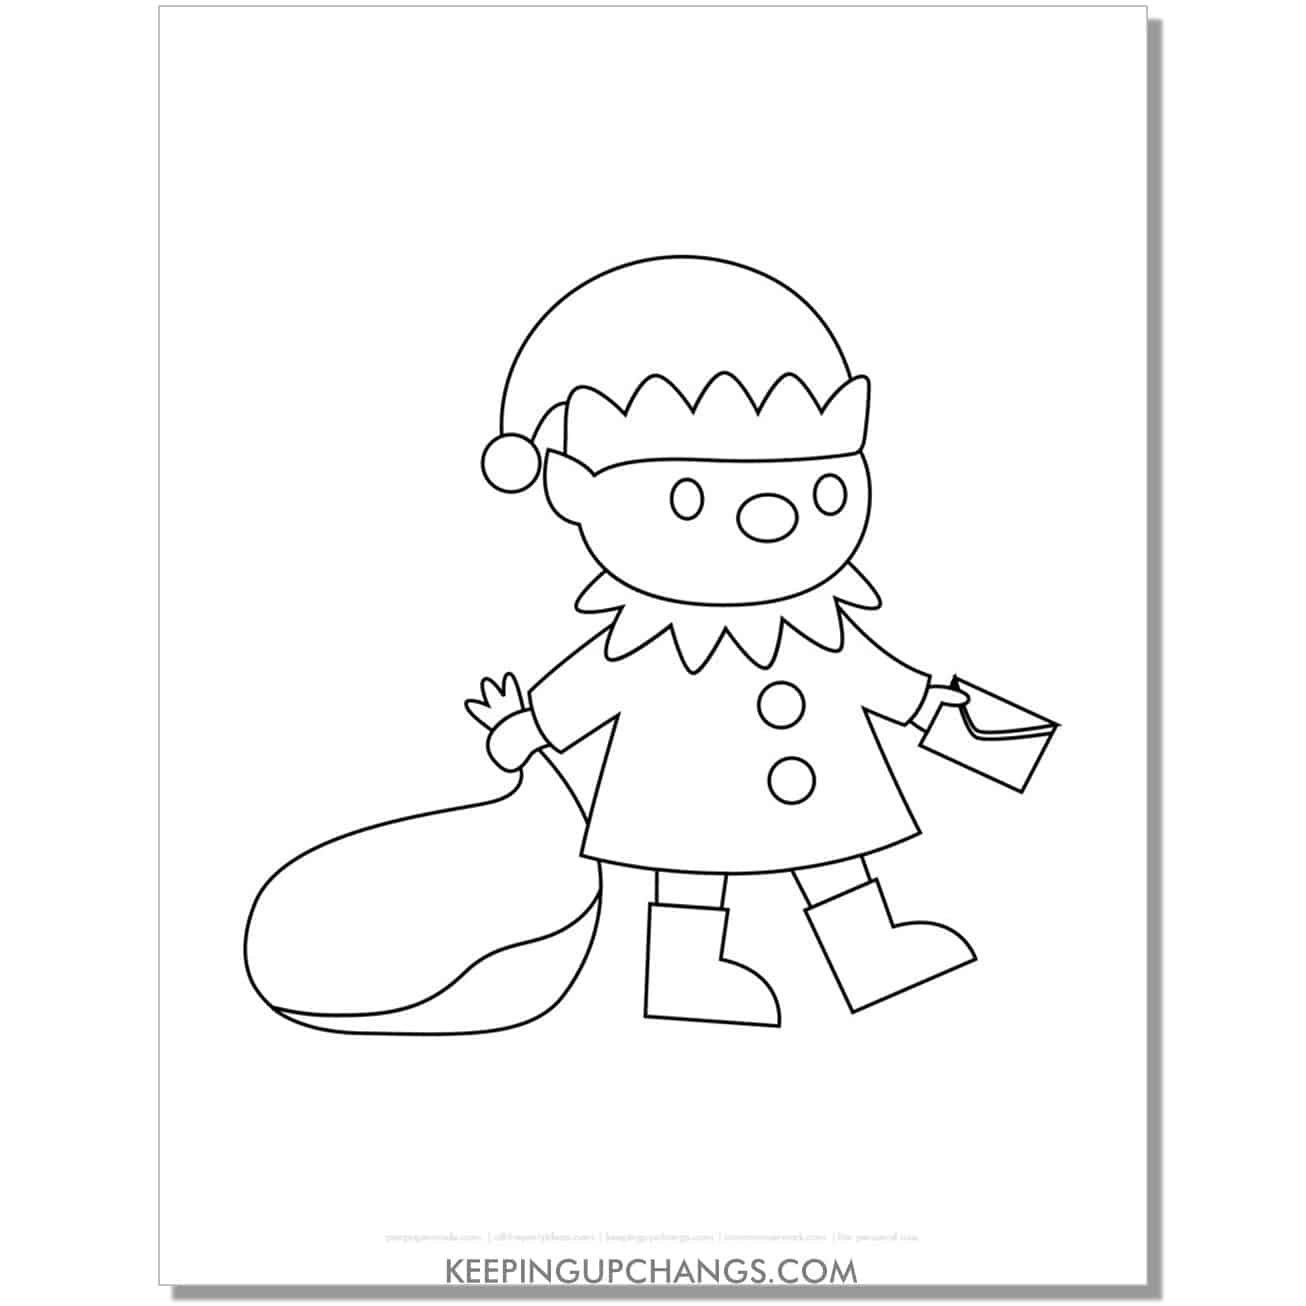 free elf carrying letters to santa coloring page for toddlers.